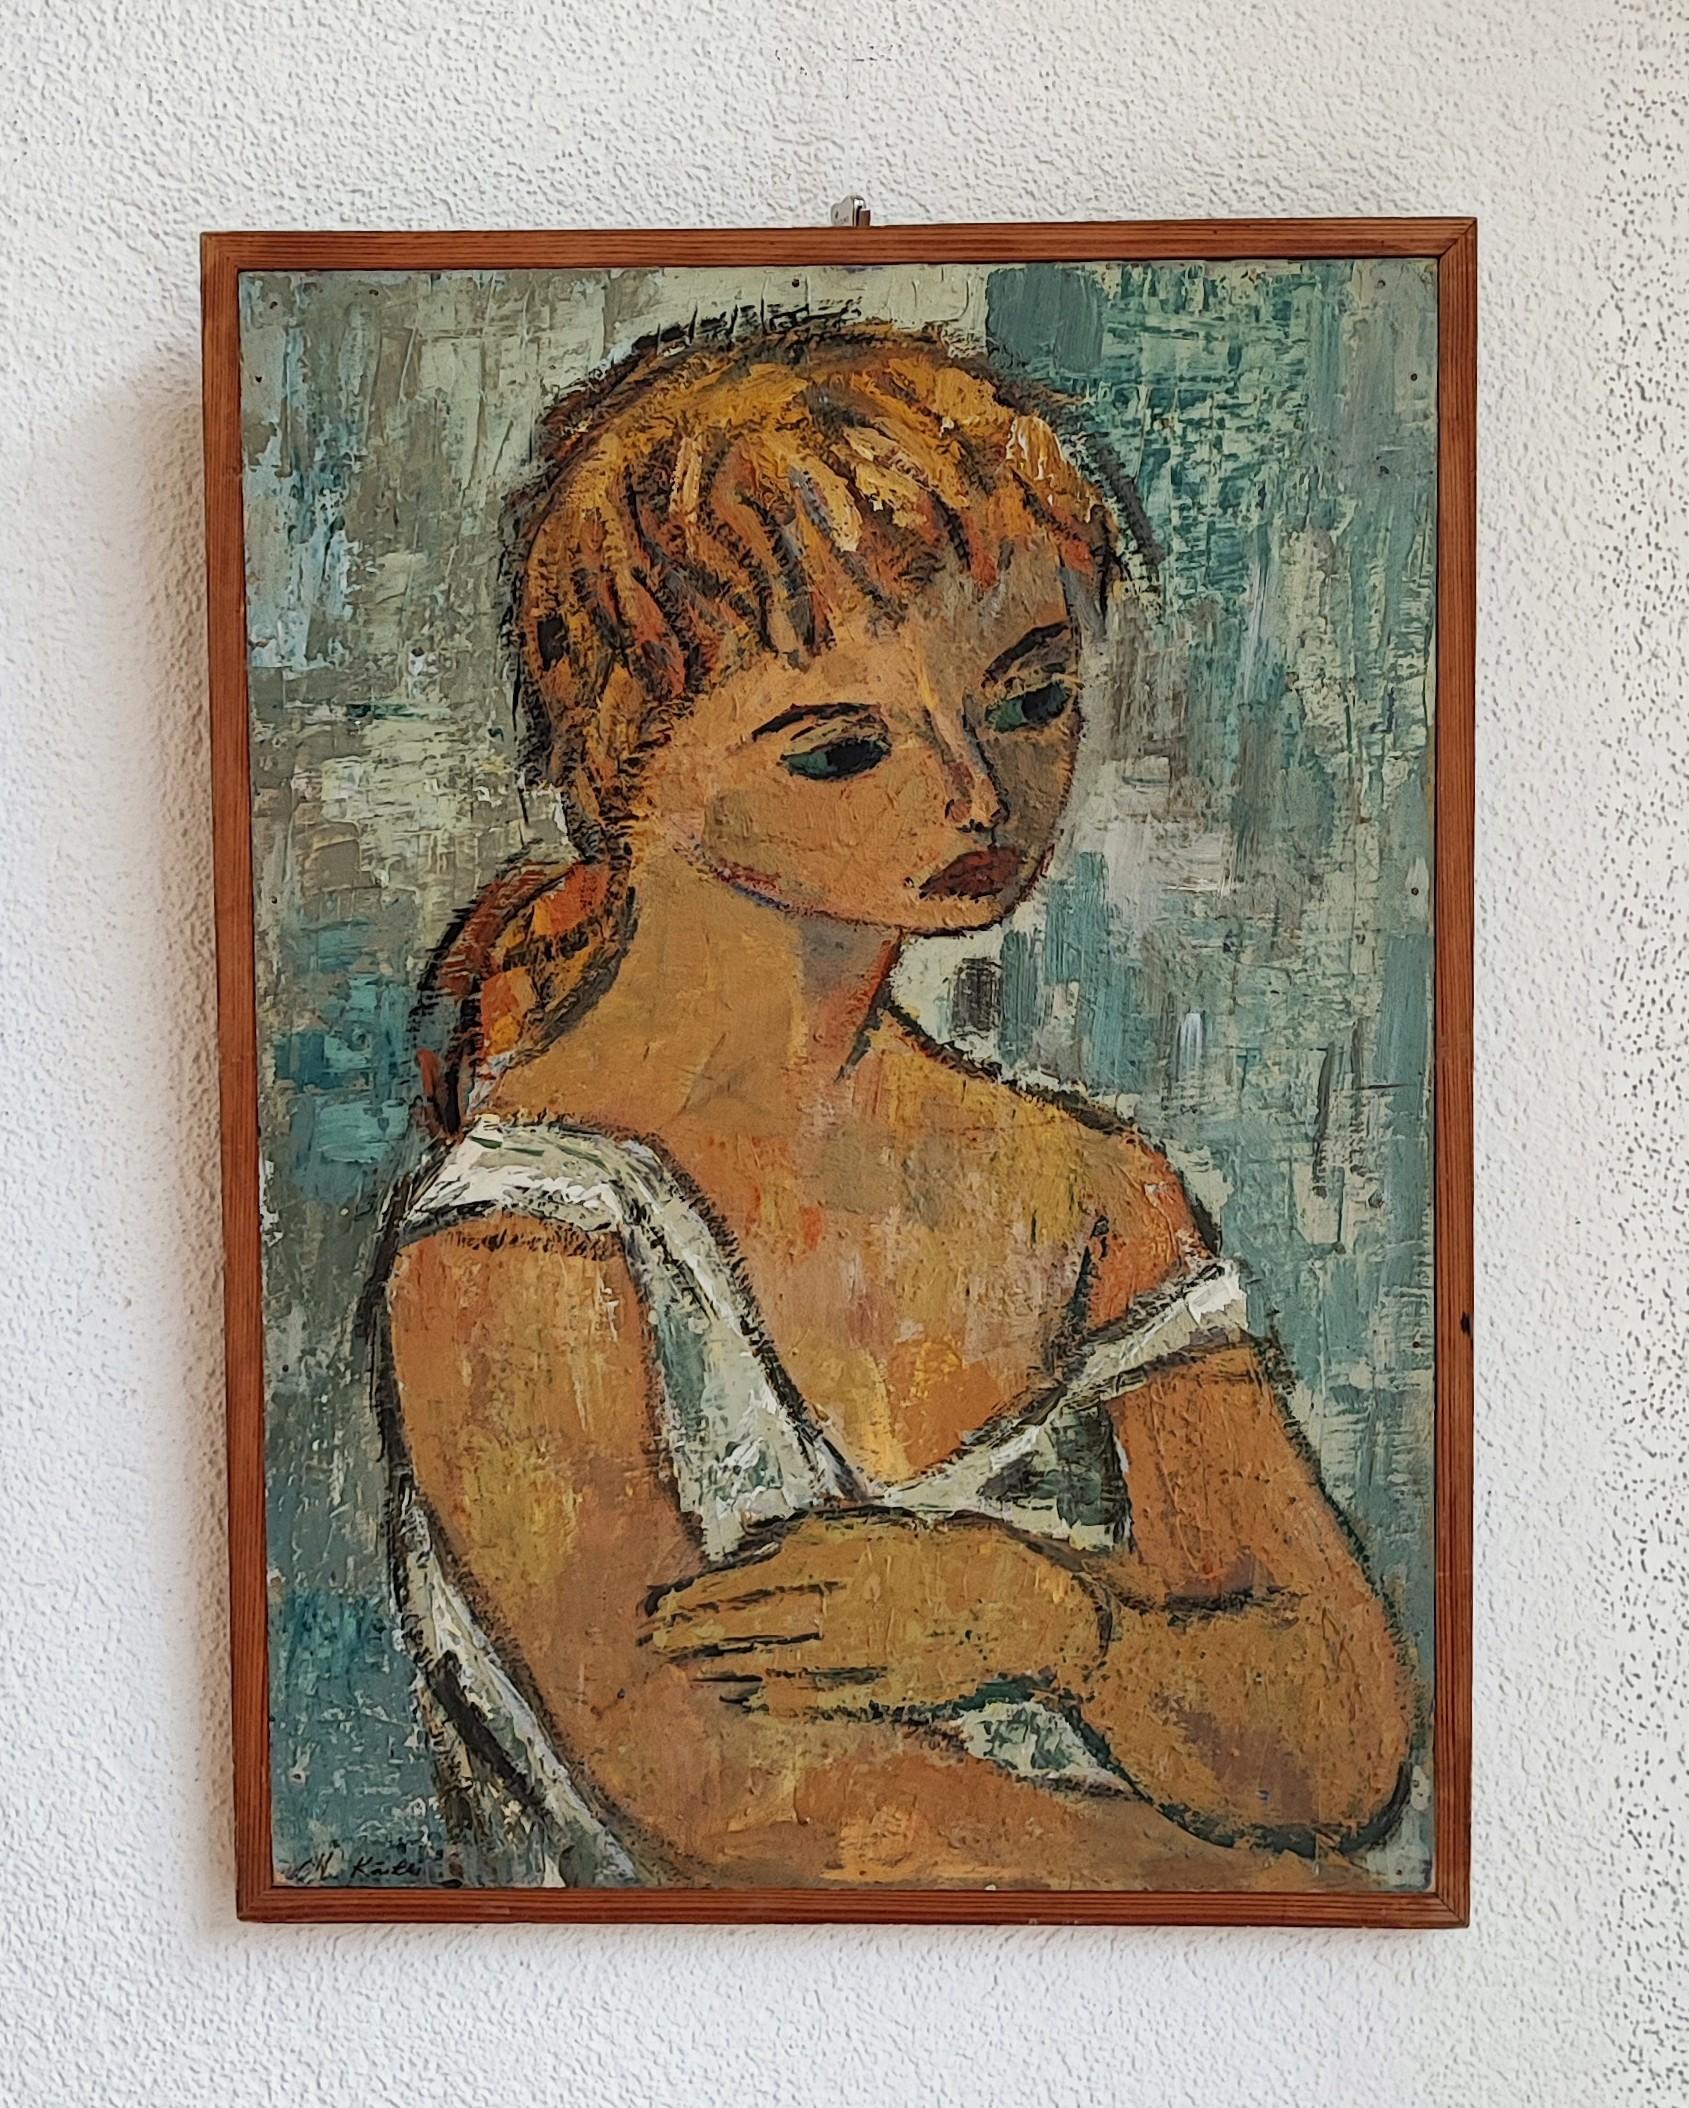 Thoughtful young girl - Painting by Ch. Kàstli